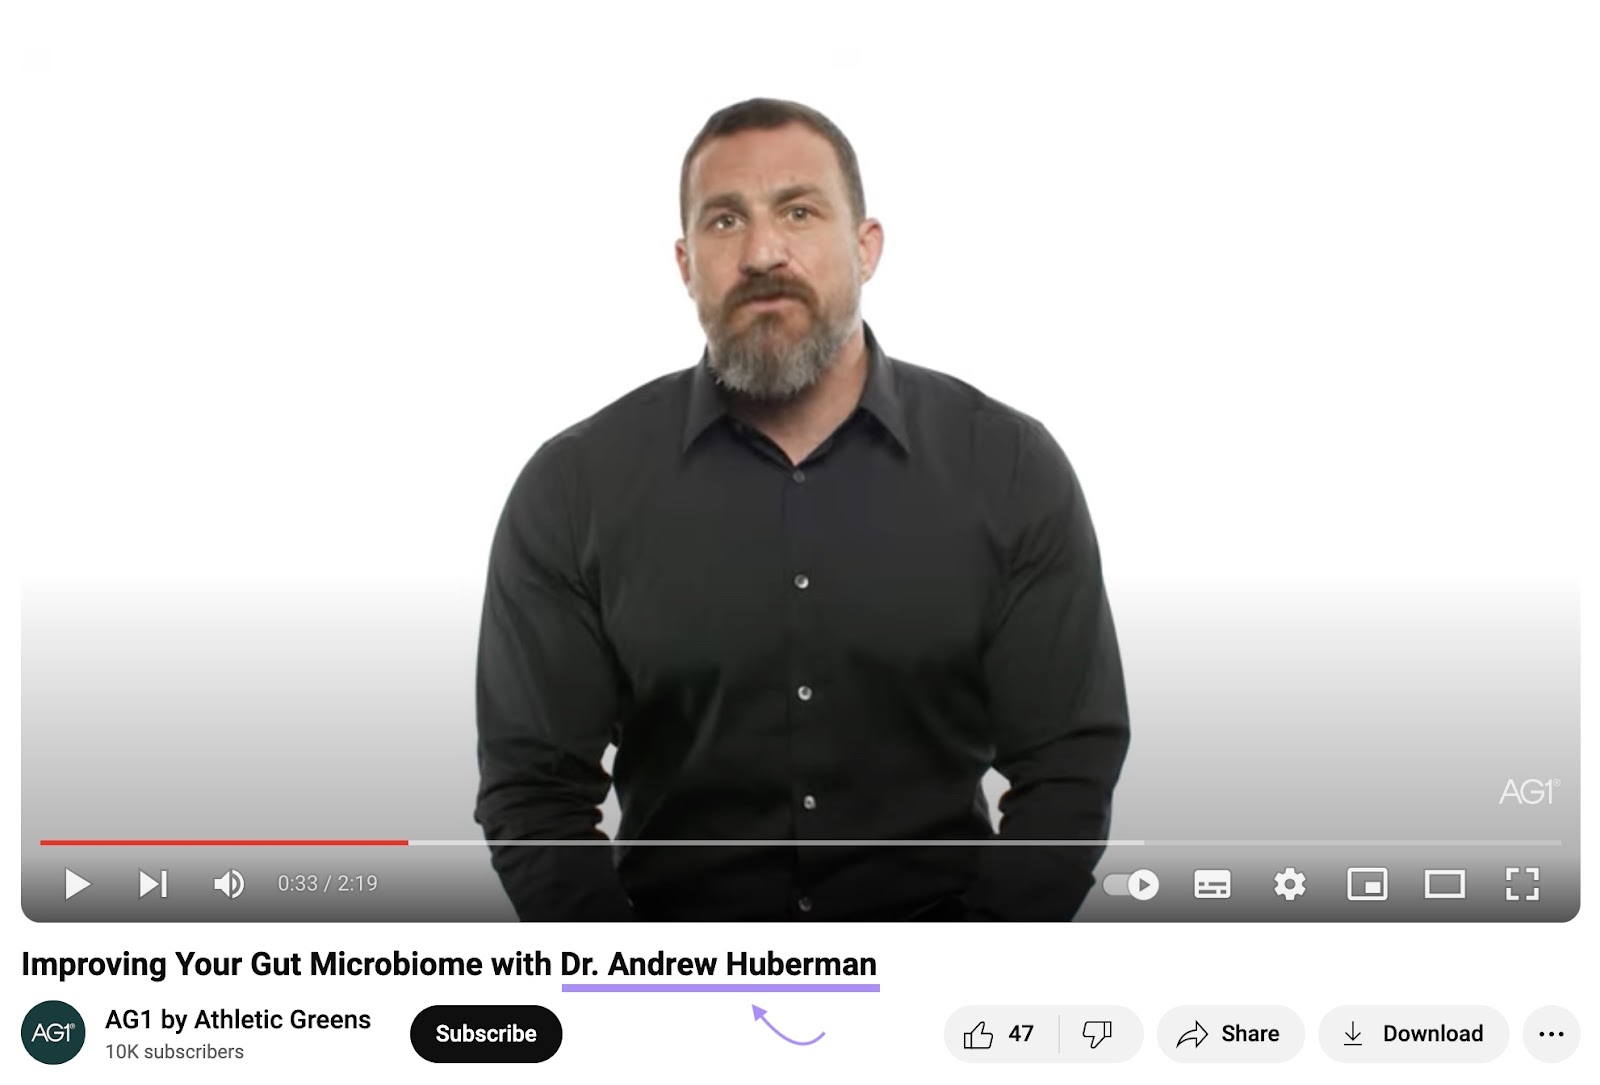 YouTube video from nutrition company Athletic Greens on improving your gut microbiome